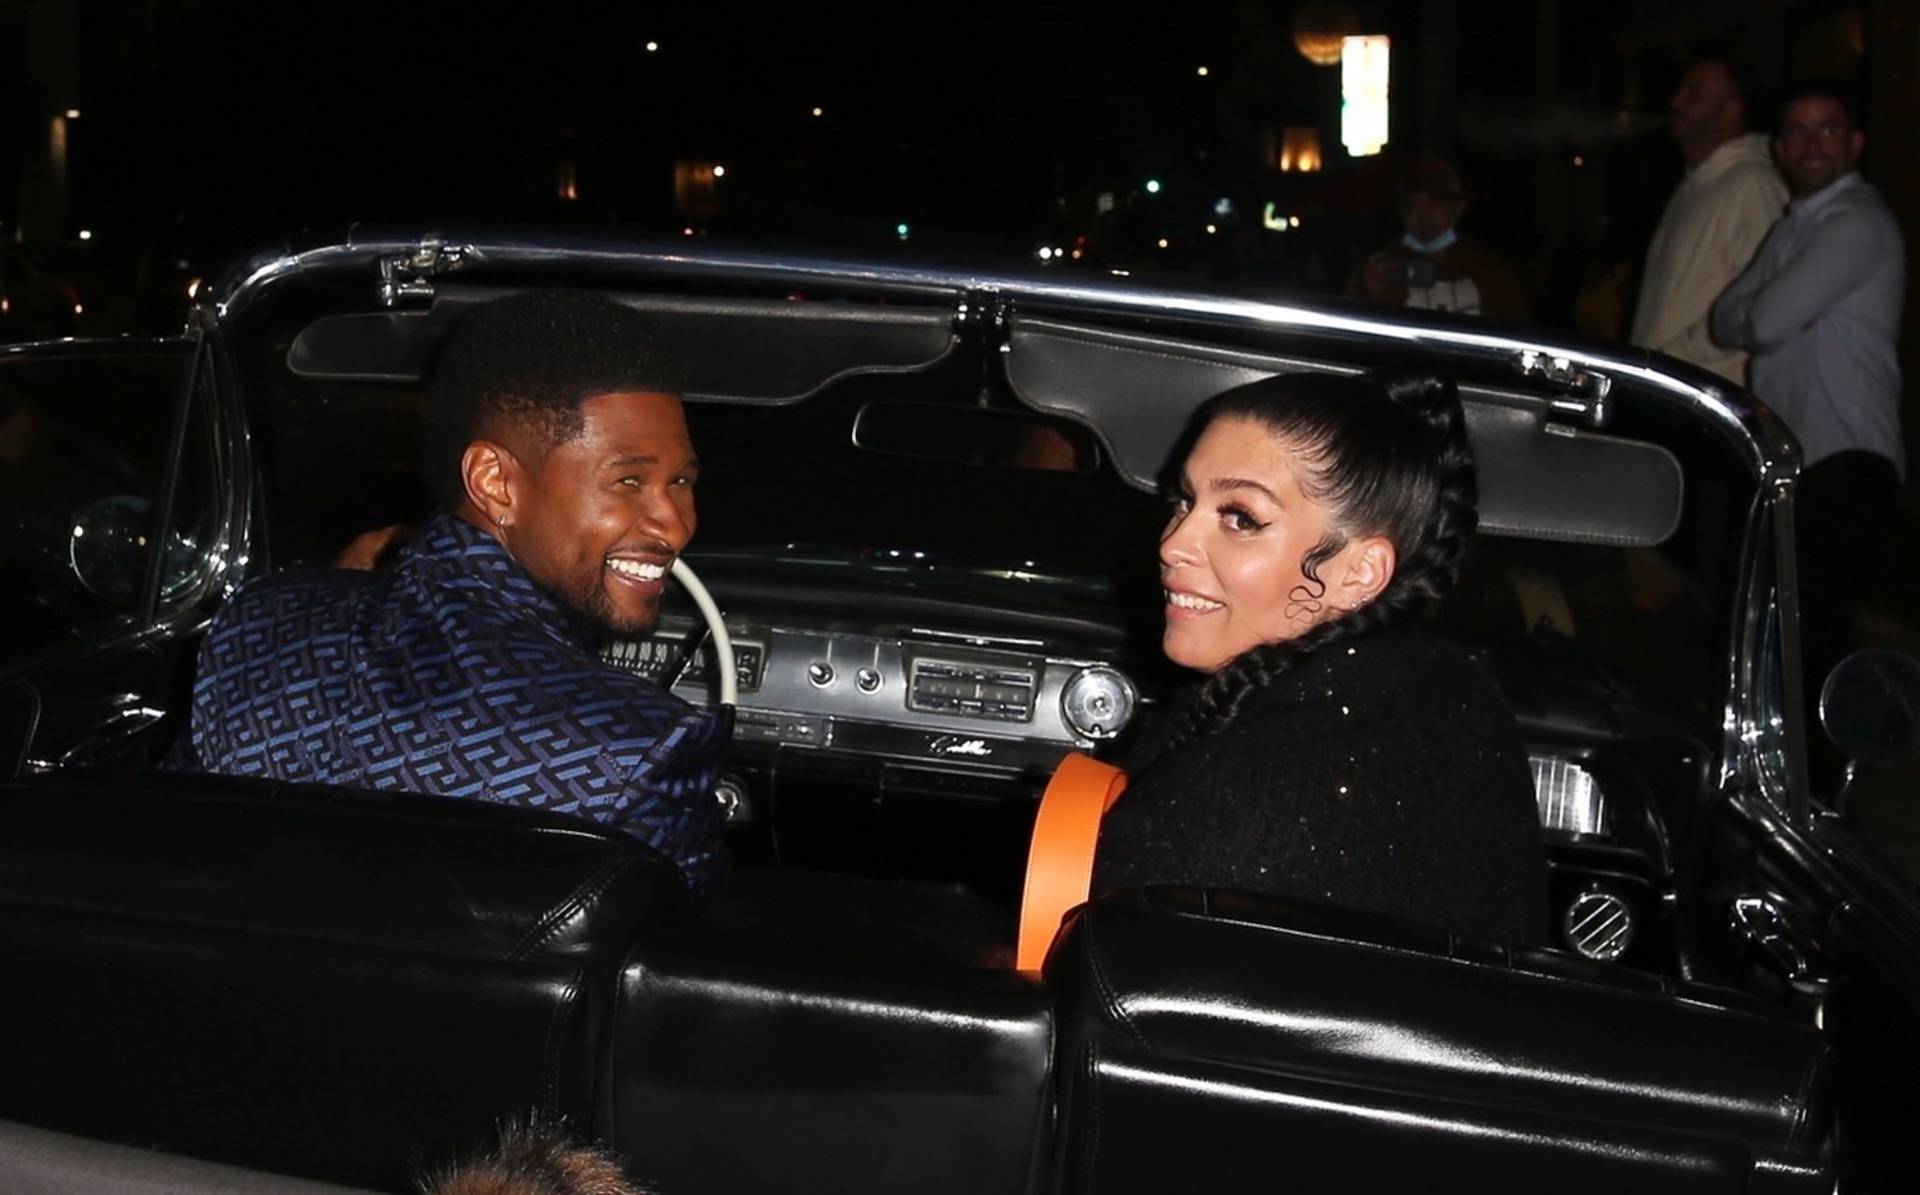 *EXCLUSIVE* Usher and his pregnant girlfriend Jennifer Goicoechea grab dinner at Nobu after hosting the iHeartRadio Music Awards